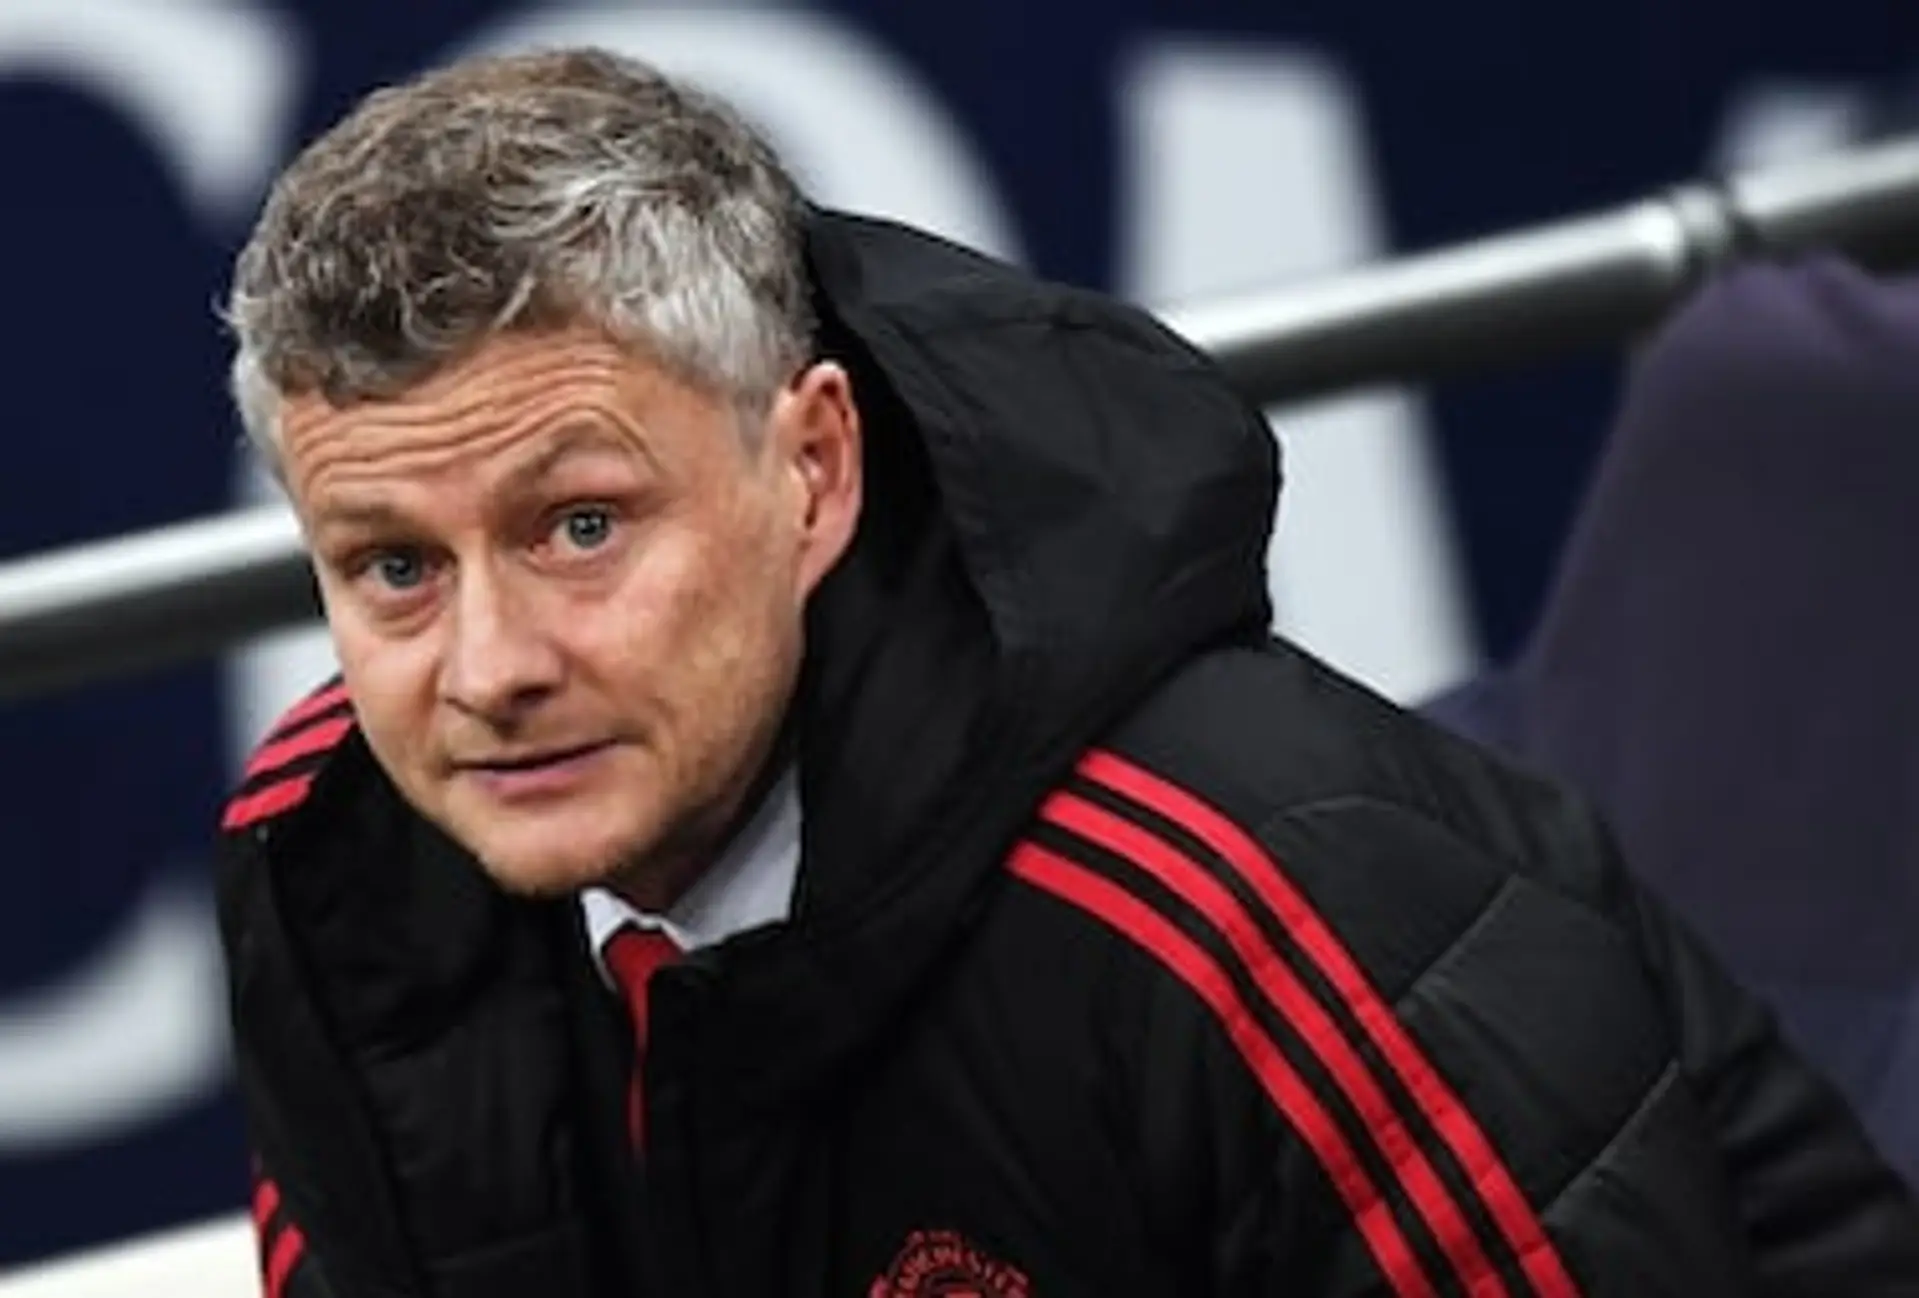 Amad & Greenwood in: How Man United could line up vs Real Sociedad